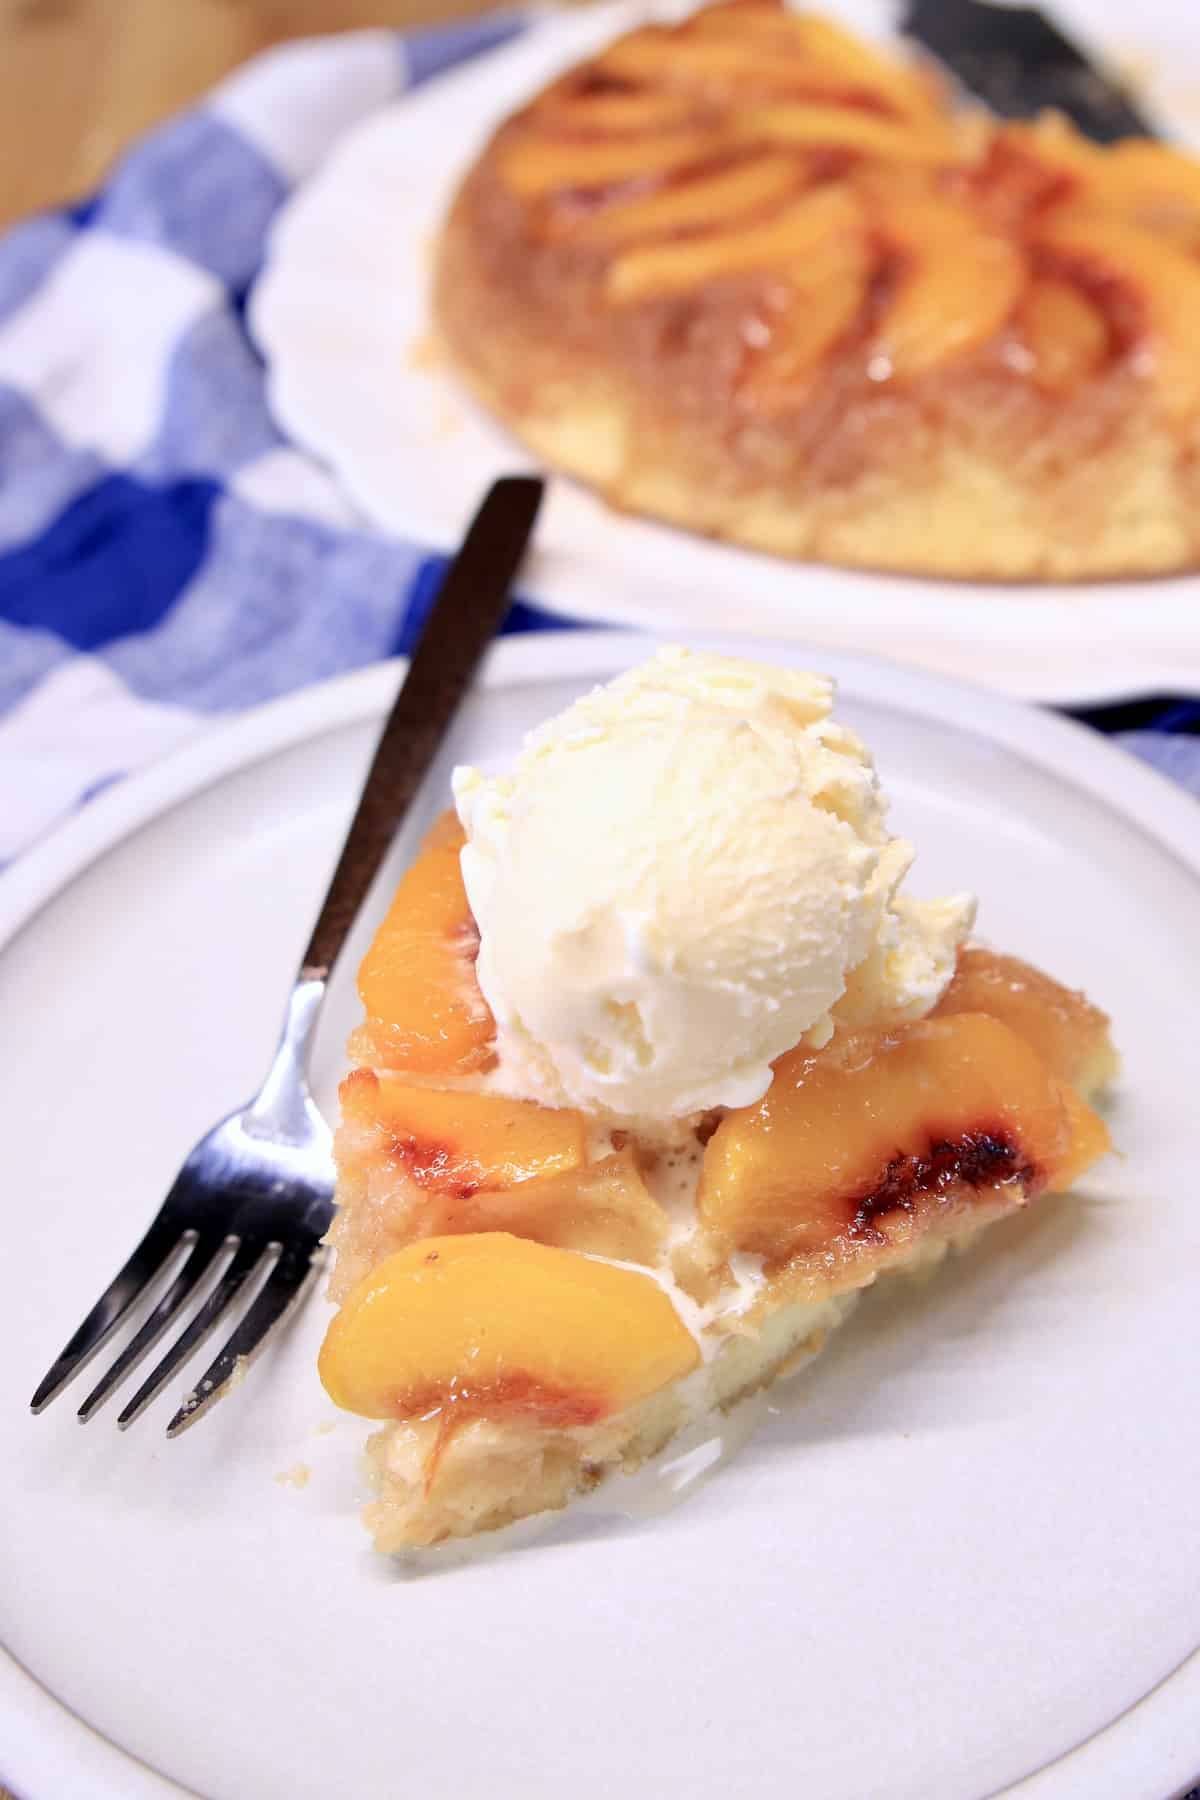 Slice of Peach Upside Down cake with vanilla ice cream on a plate with fork.